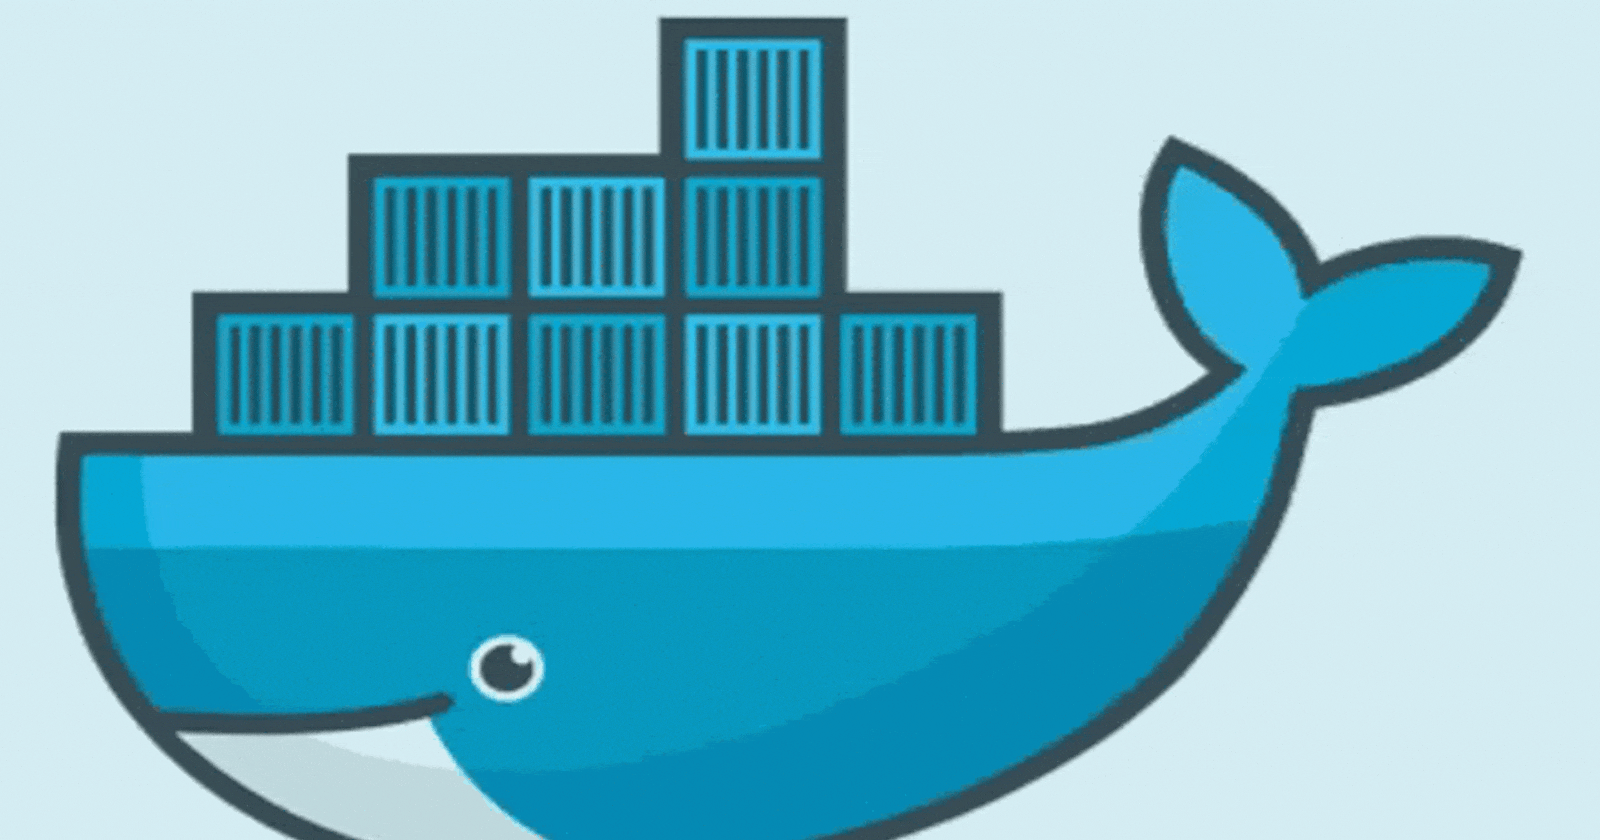 How to inspect the docker image?